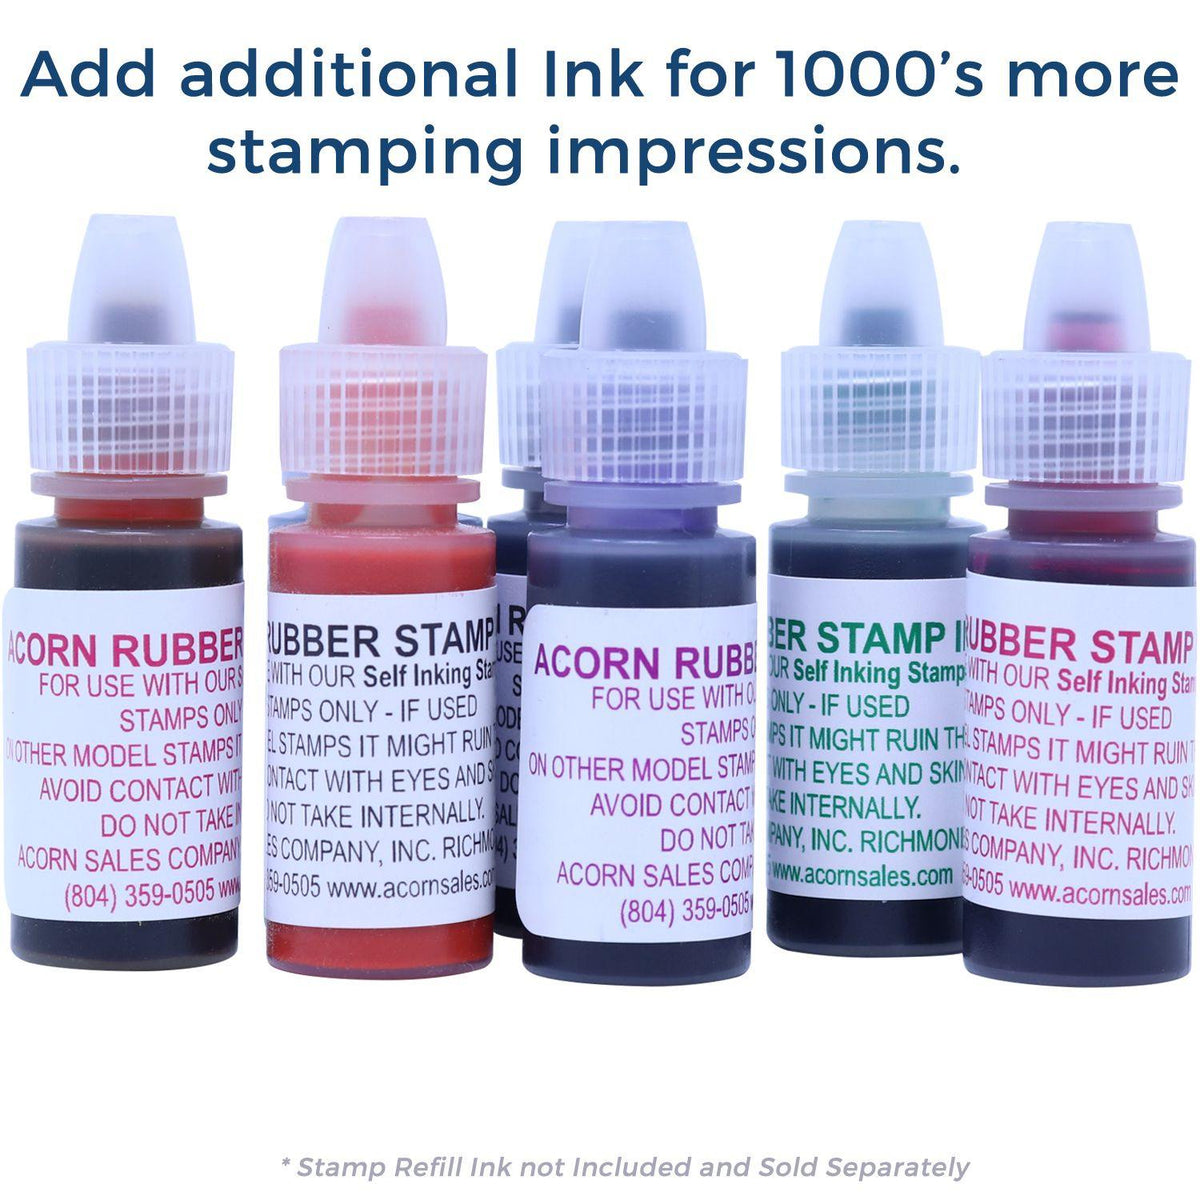 Refill Inks for Large Pre-Inked Narrow Font File Copy Stamp Available